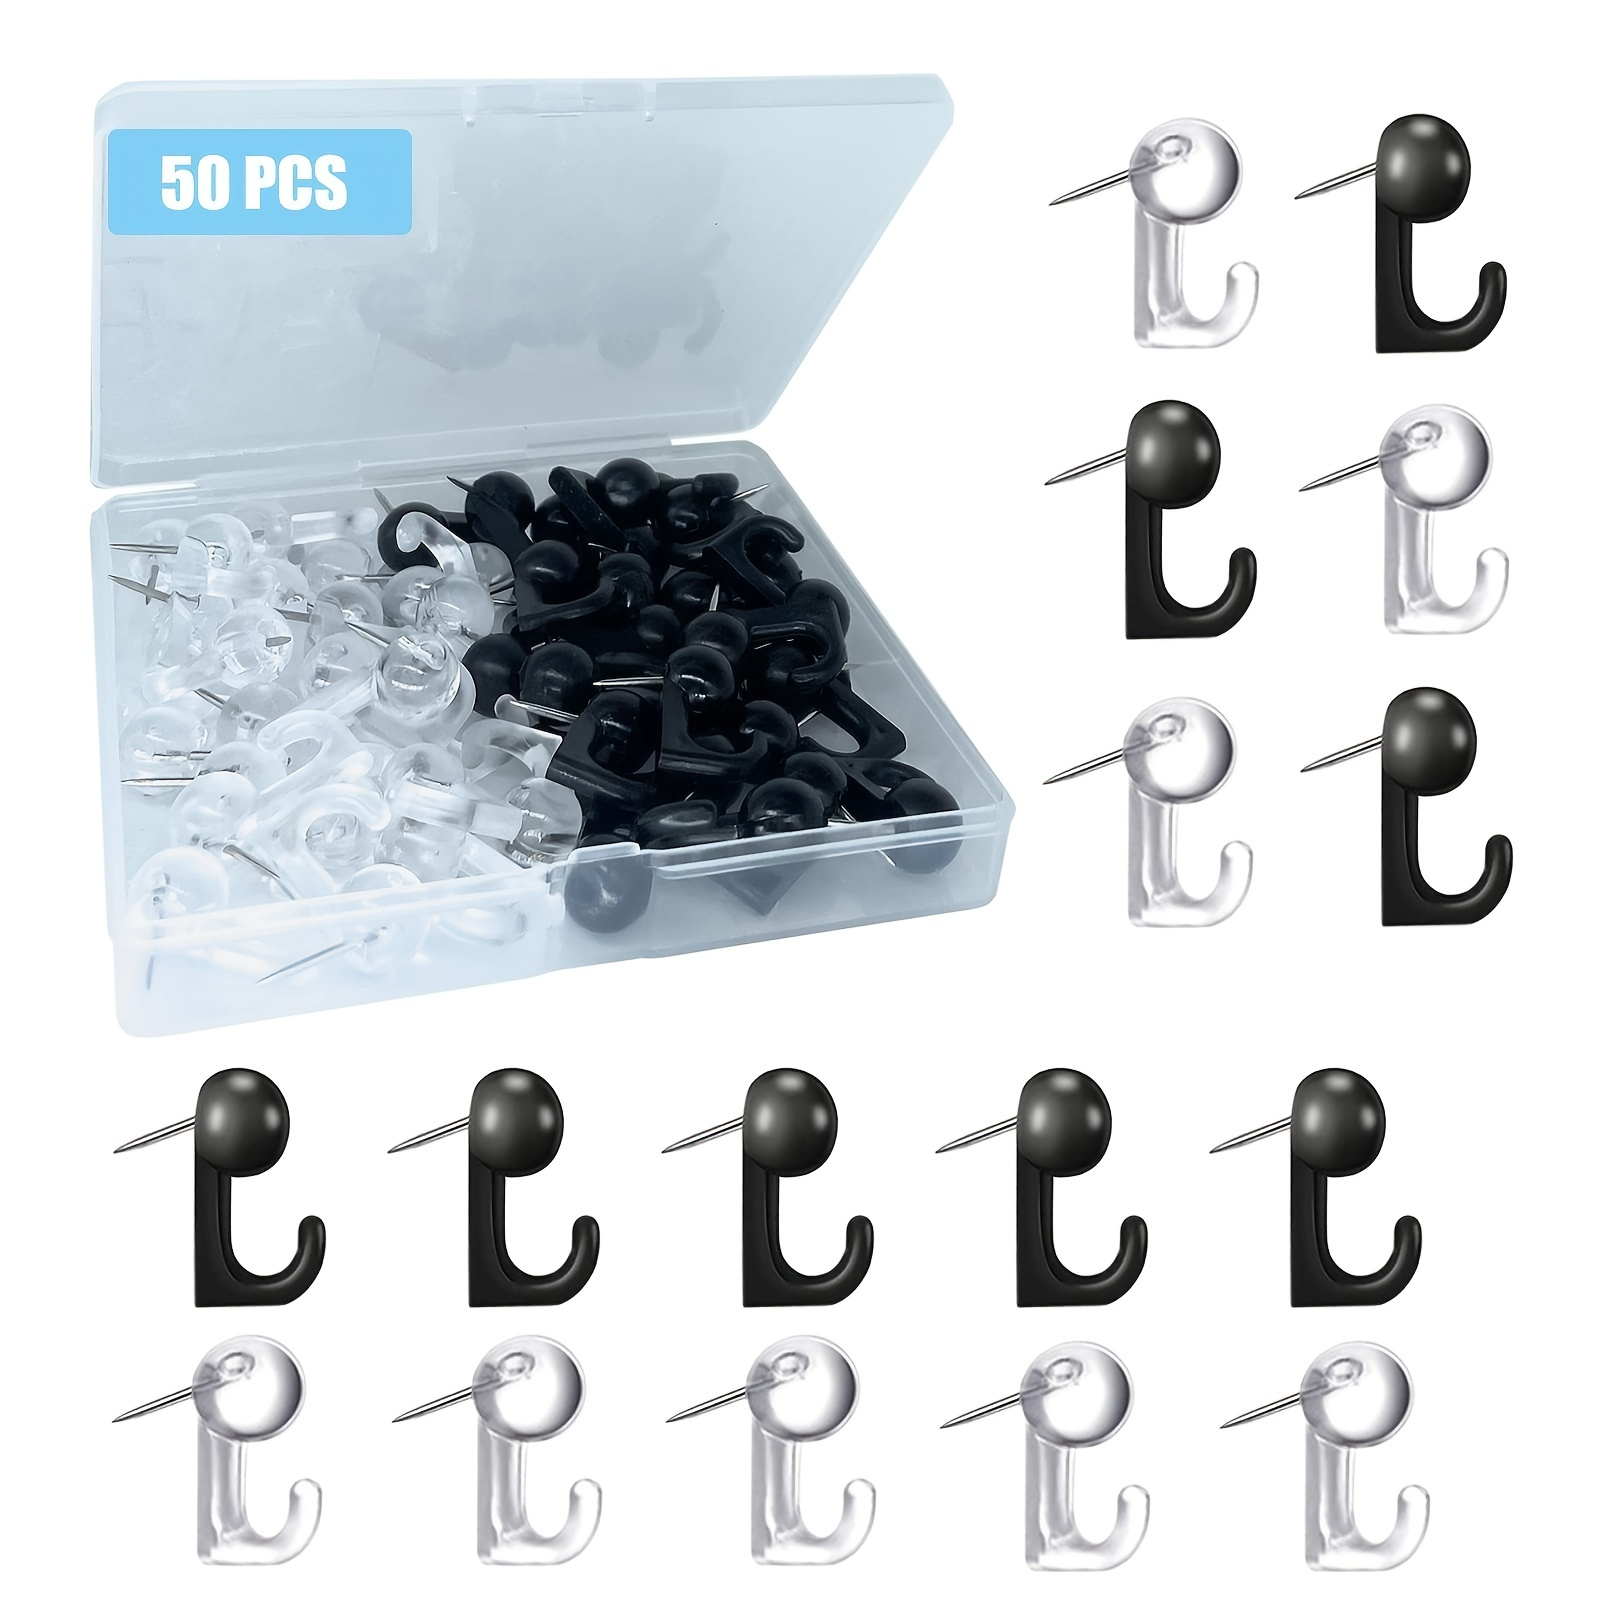 

50 Pcs Push Pin Hooks, Plastic Heads Cork Board Hooks Decorative Thumb Tacks Hook For Photo Wall, Bulletin Board, Home Wall, Home Office School Supplies (black And Clear)